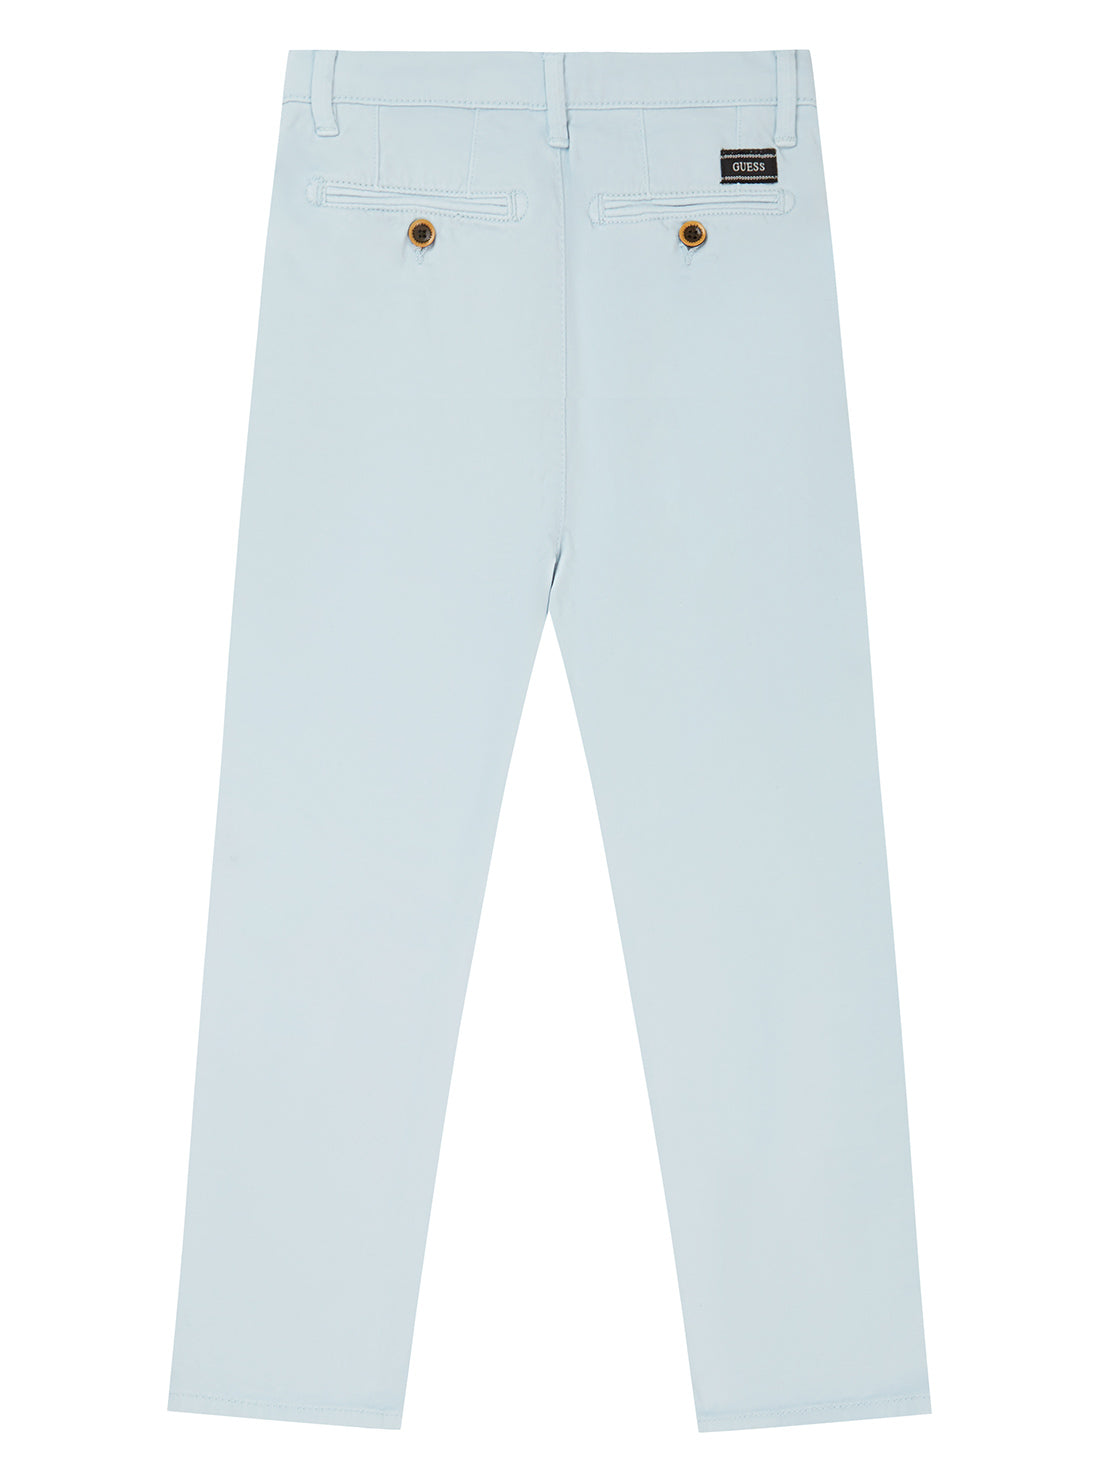 Frosted Blue Sateen Chino Pants (2-7)